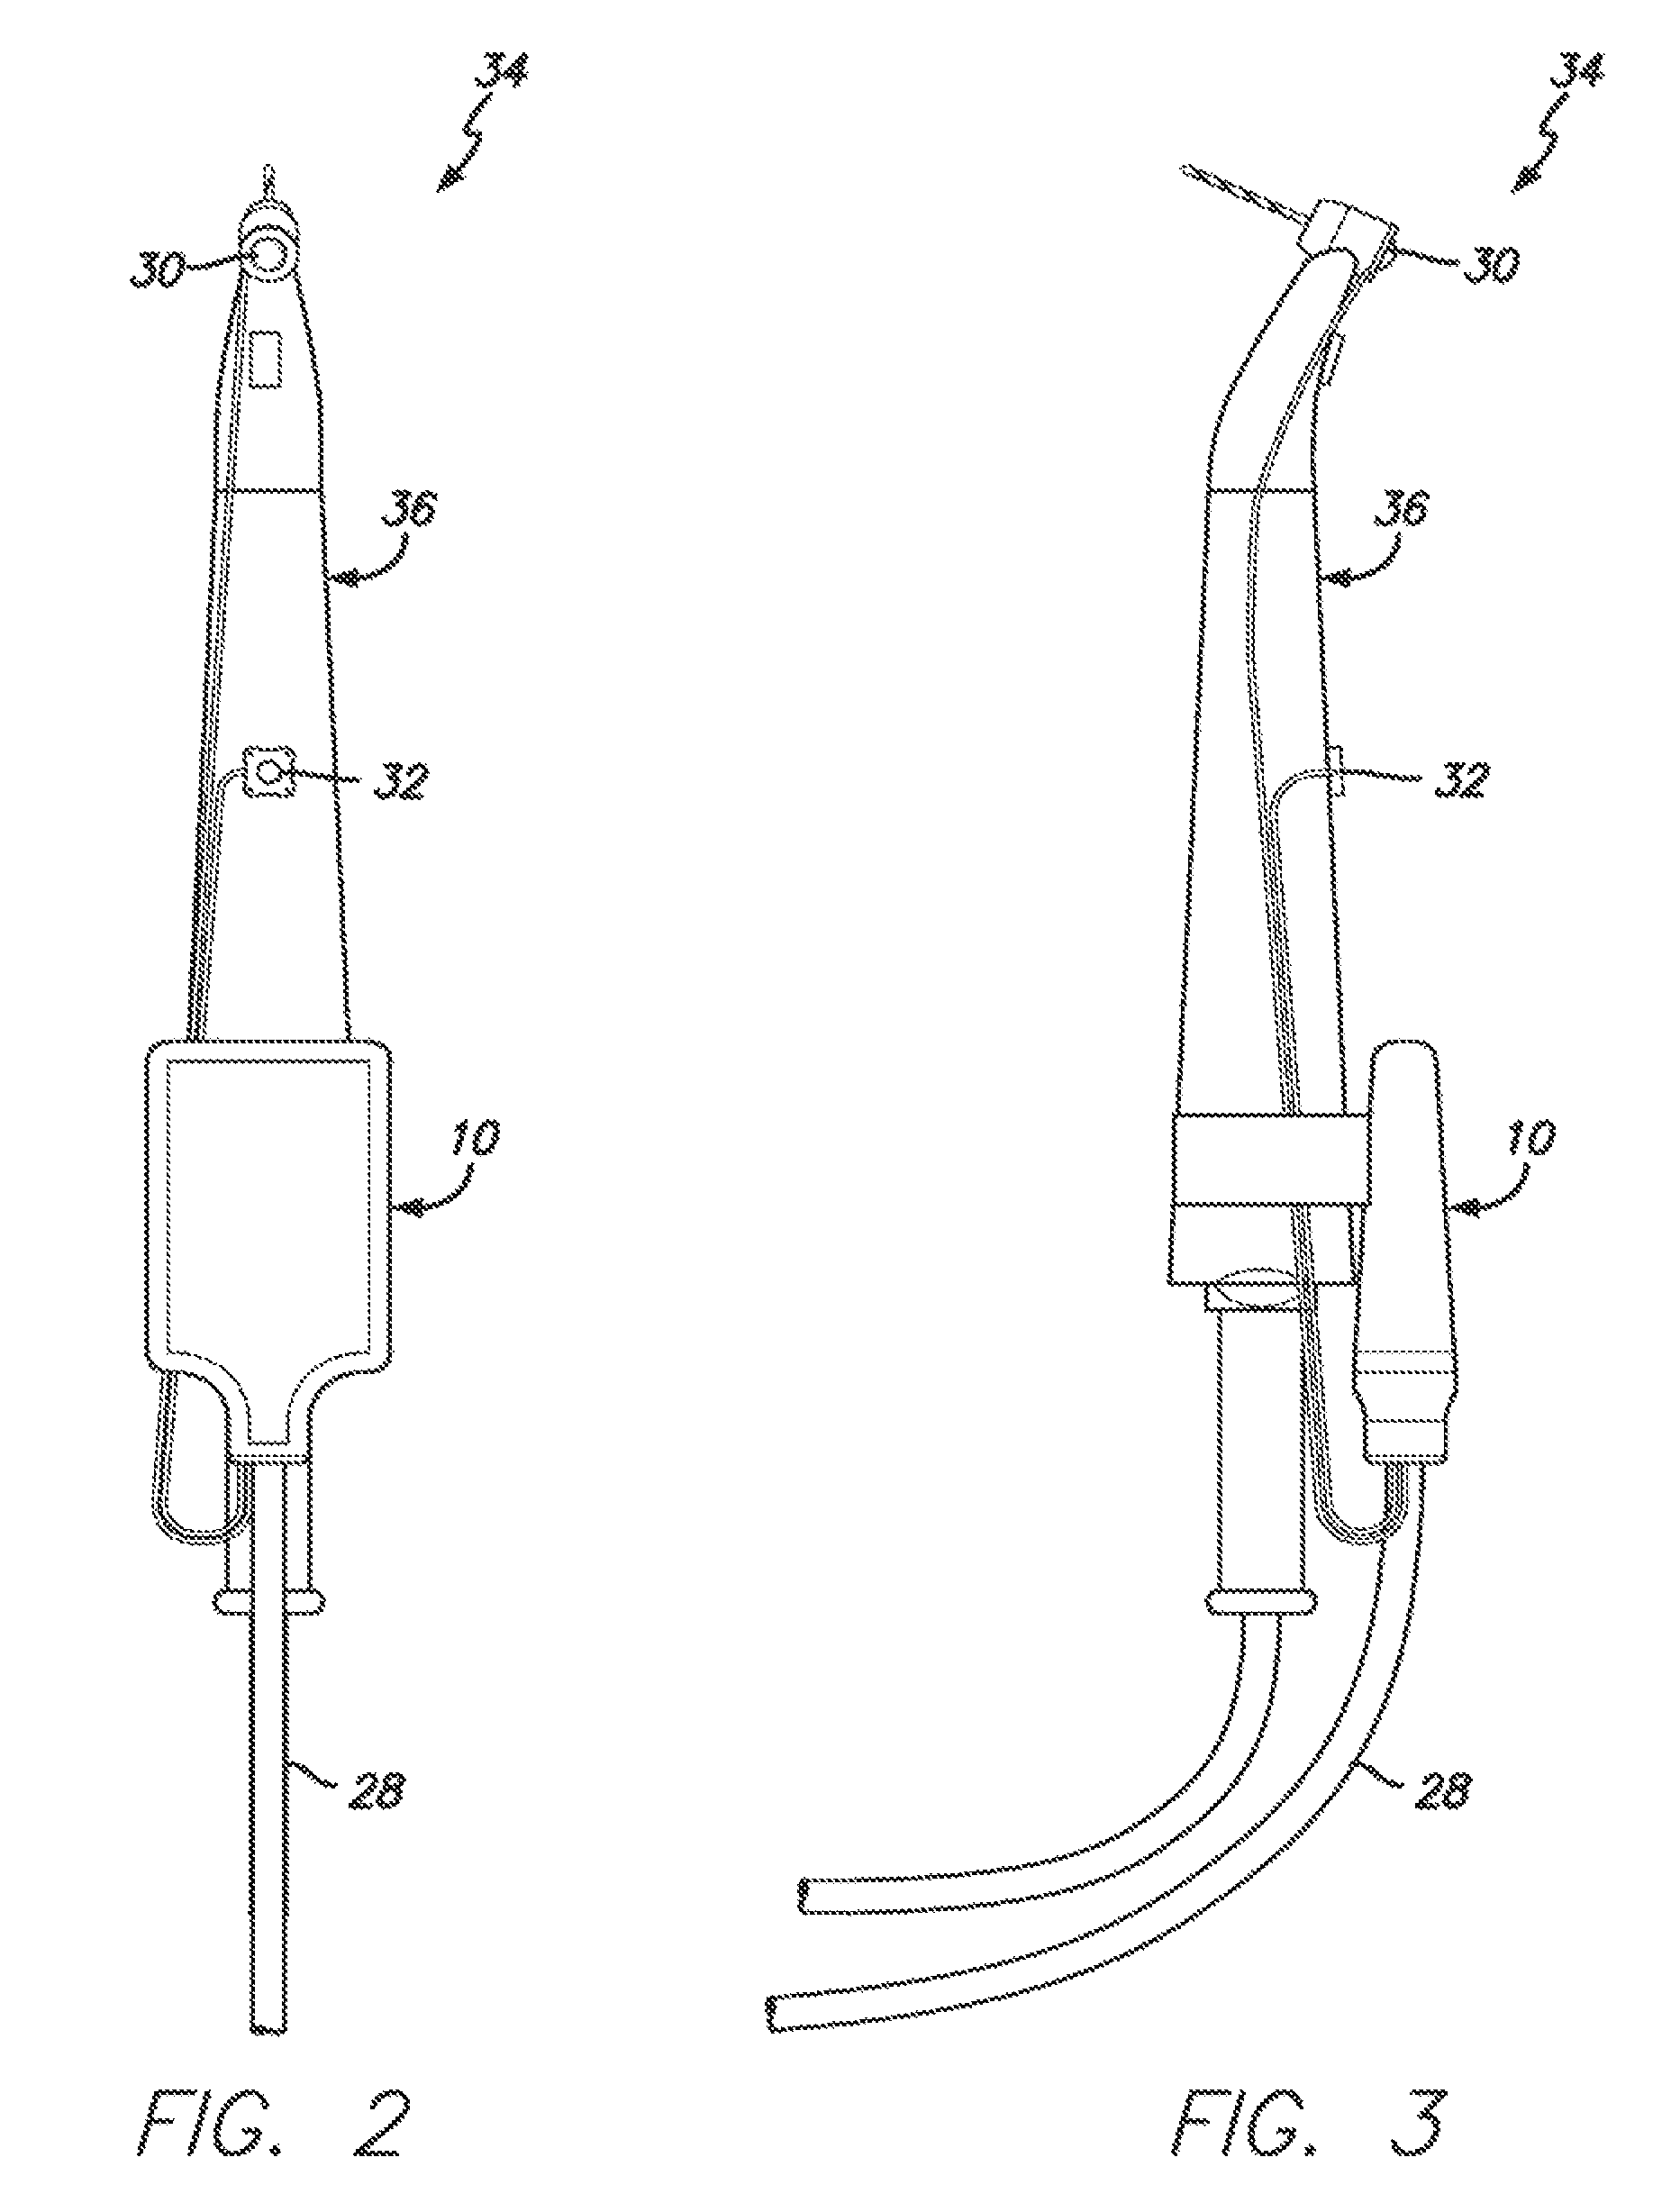 Method and device for reducing angulation error during dental procedures